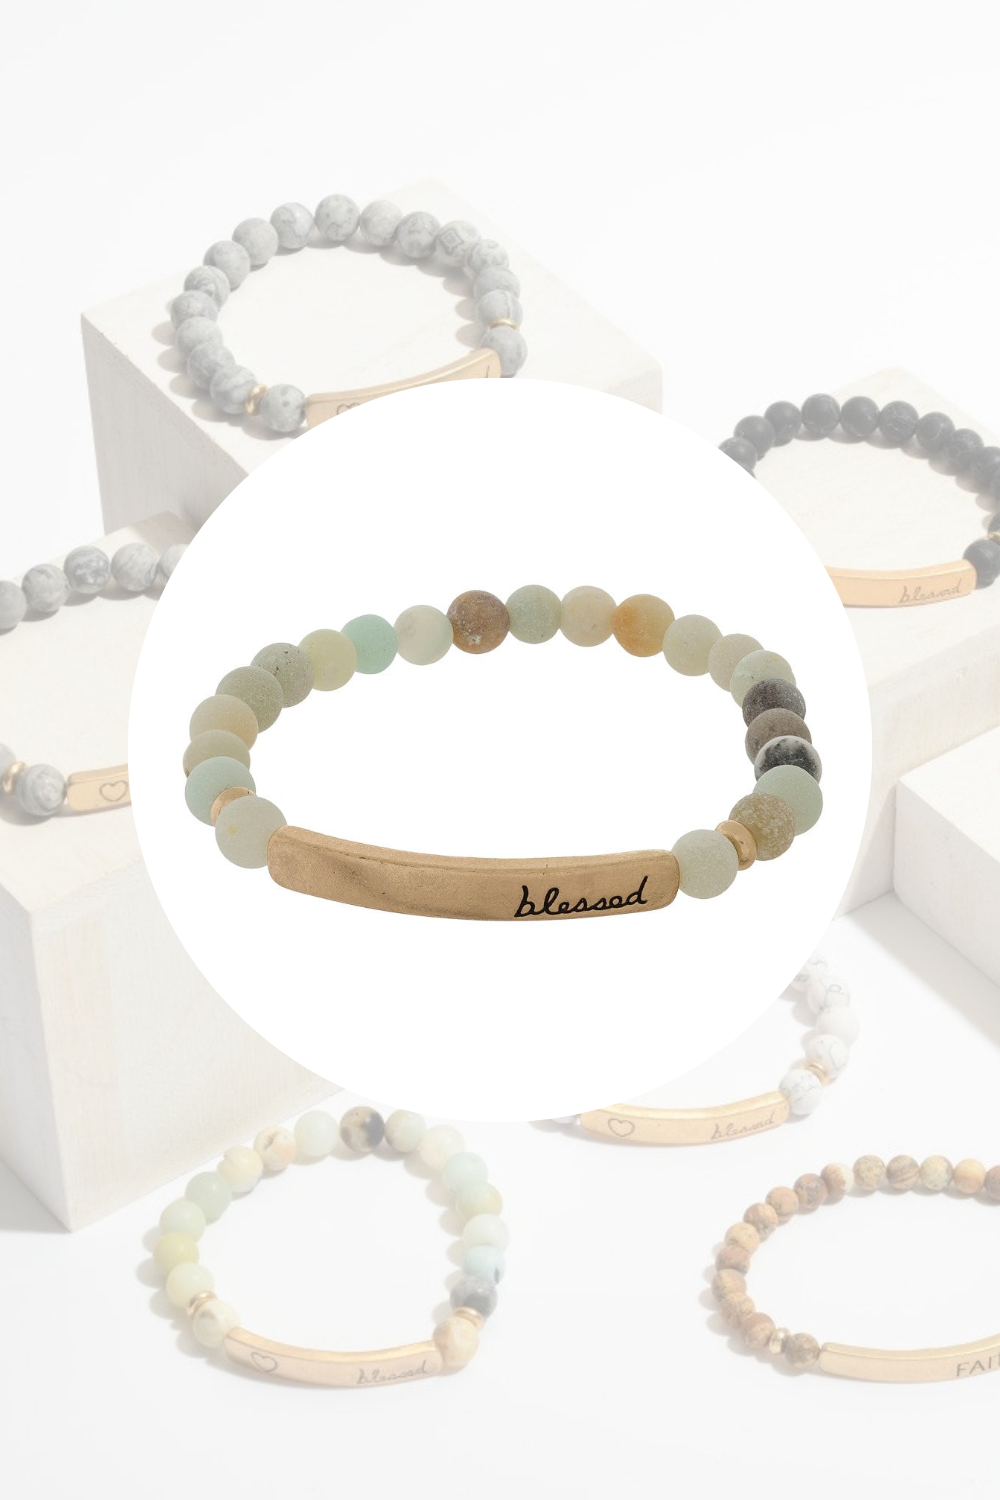 Blessed Stone Stretch Bracelet |3 colors|